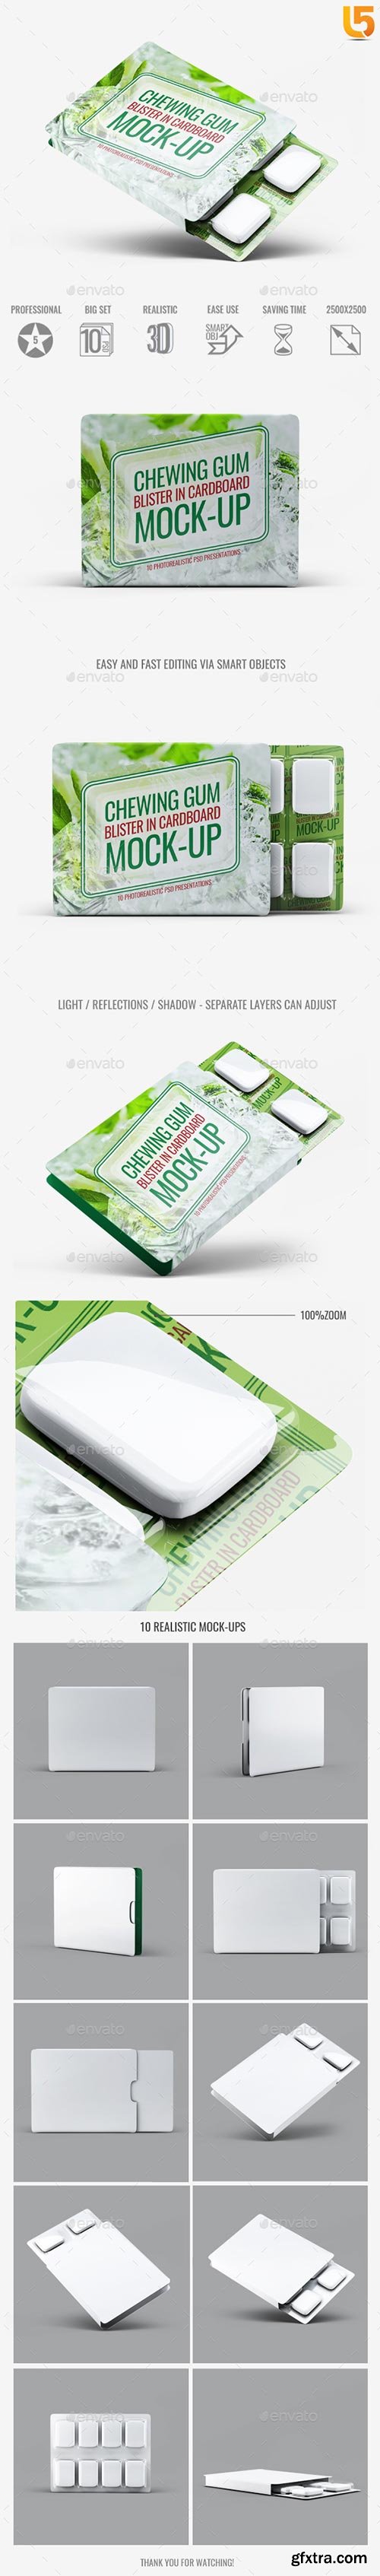 Graphicriver - Chewing Gum Blister in Cardboard Mock-Up 20413007